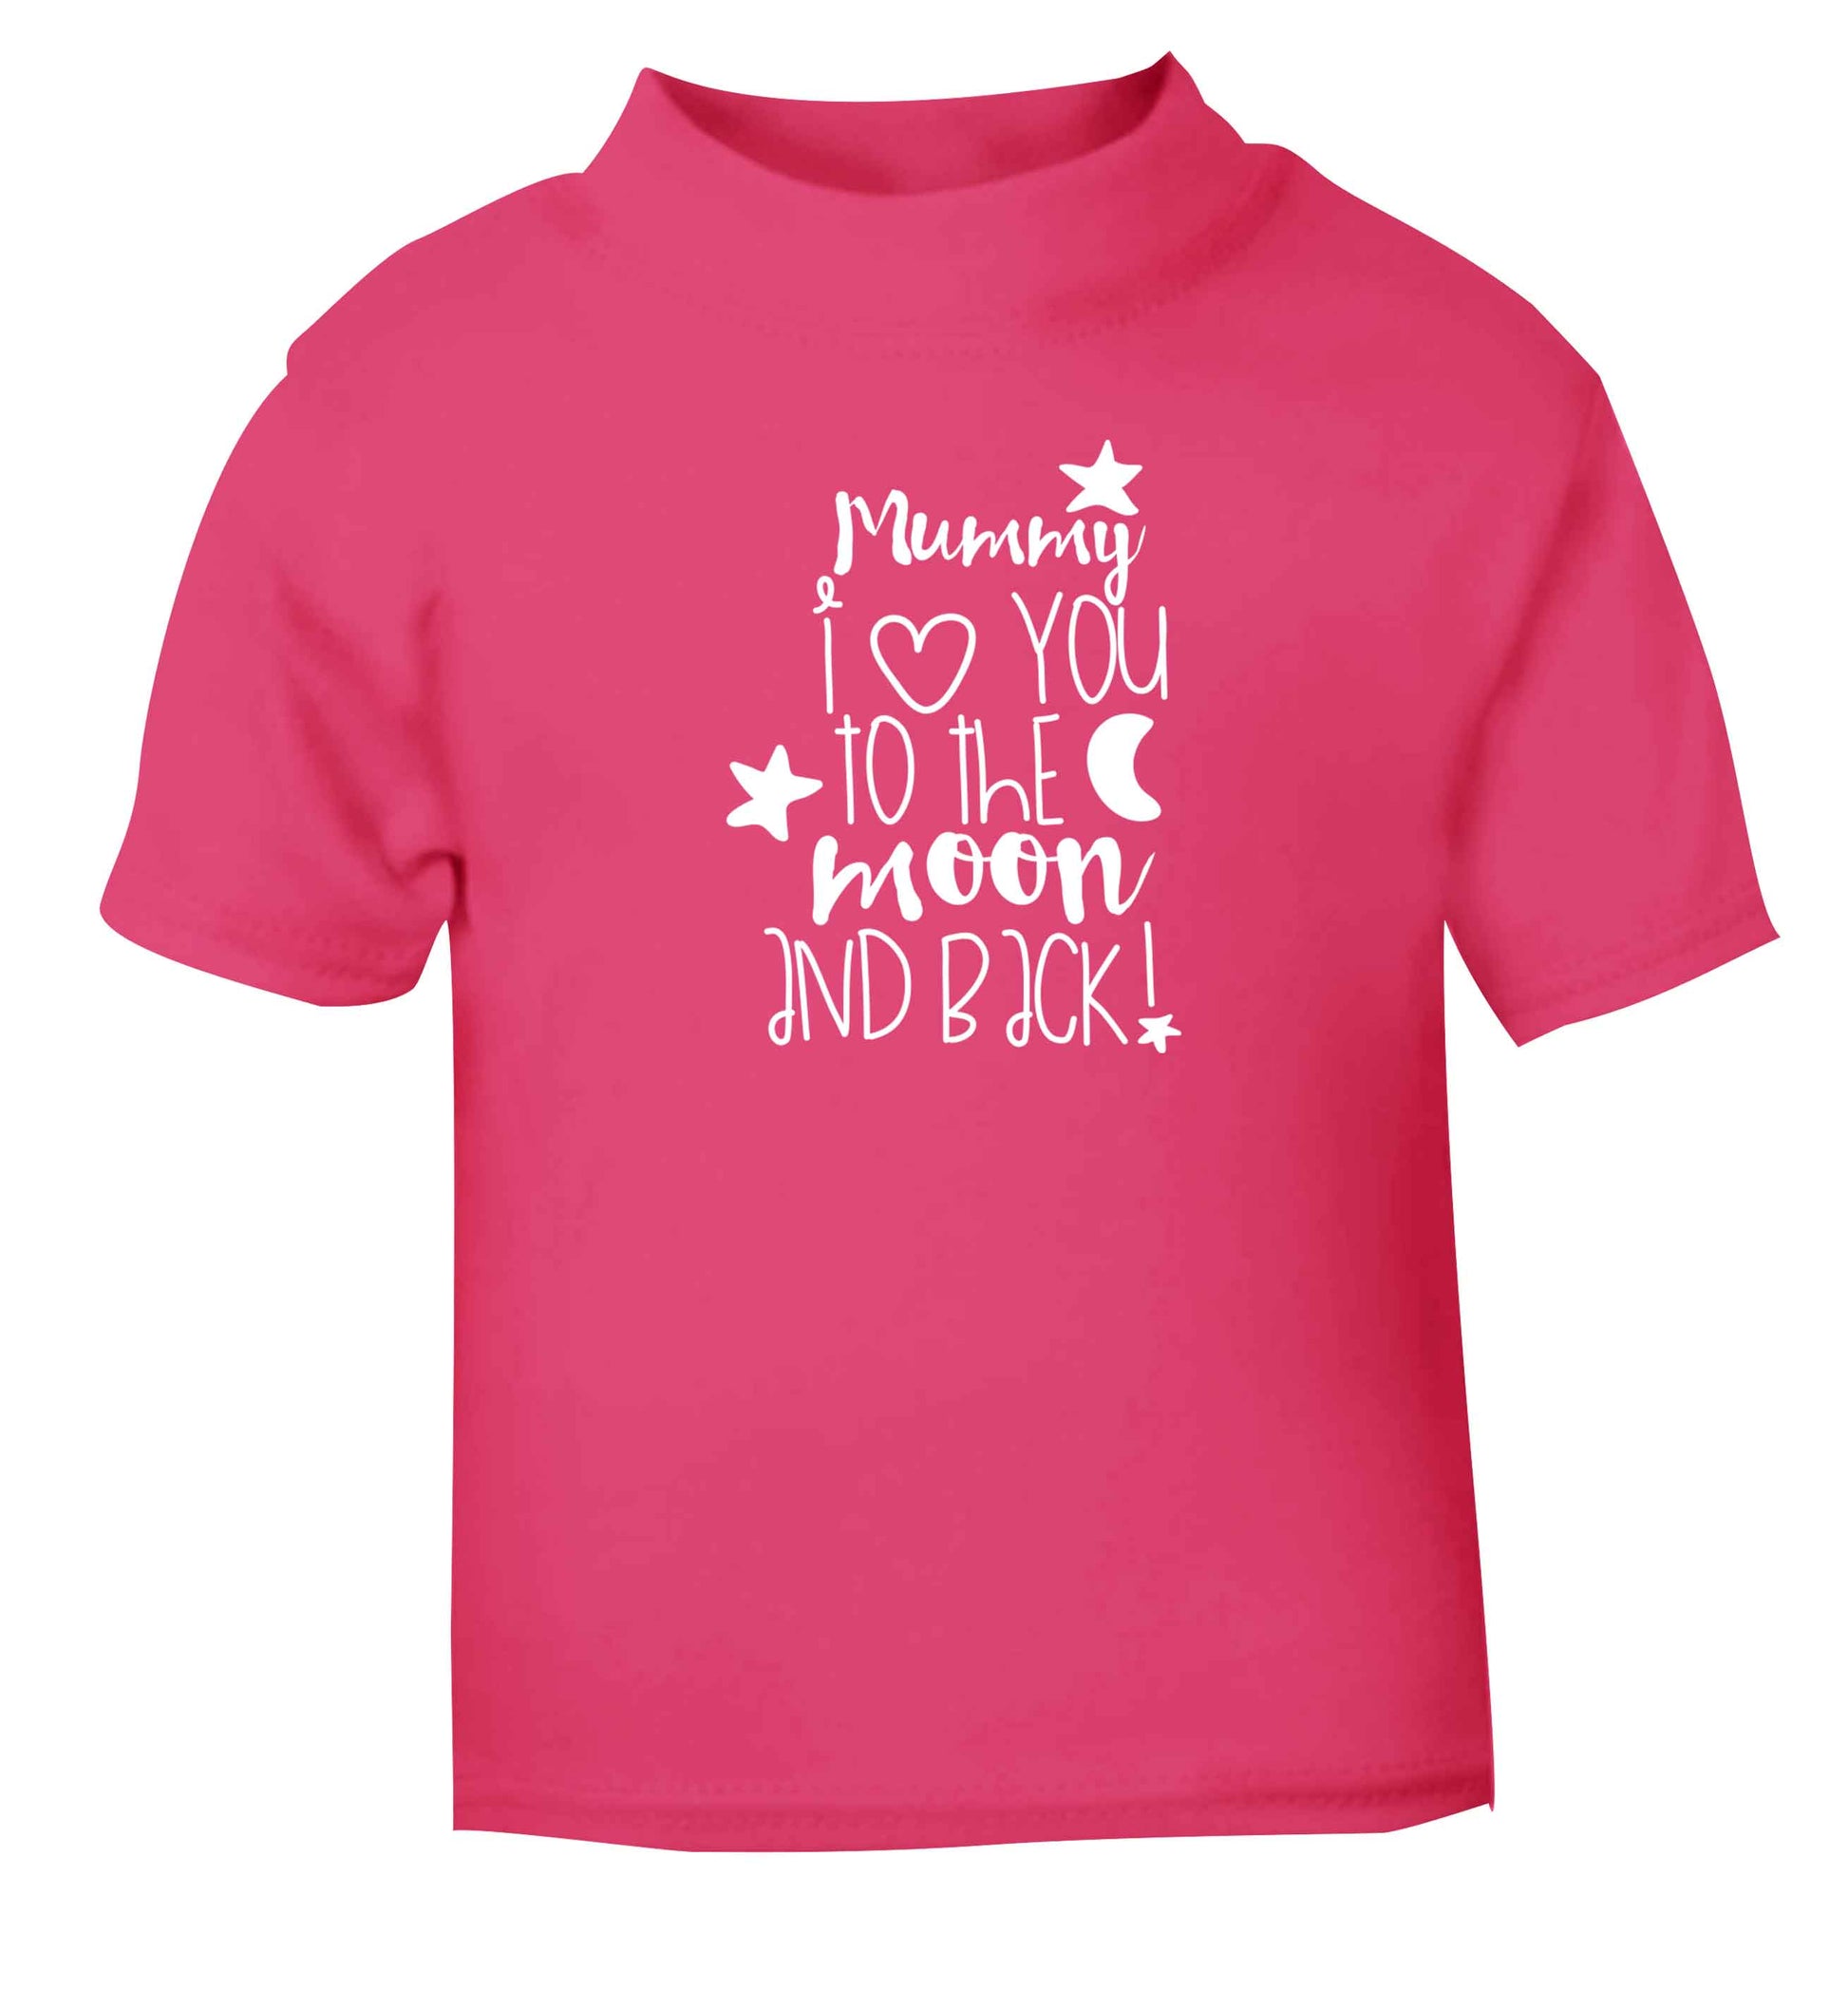 Mummy I love you to the moon and back pink baby toddler Tshirt 2 Years